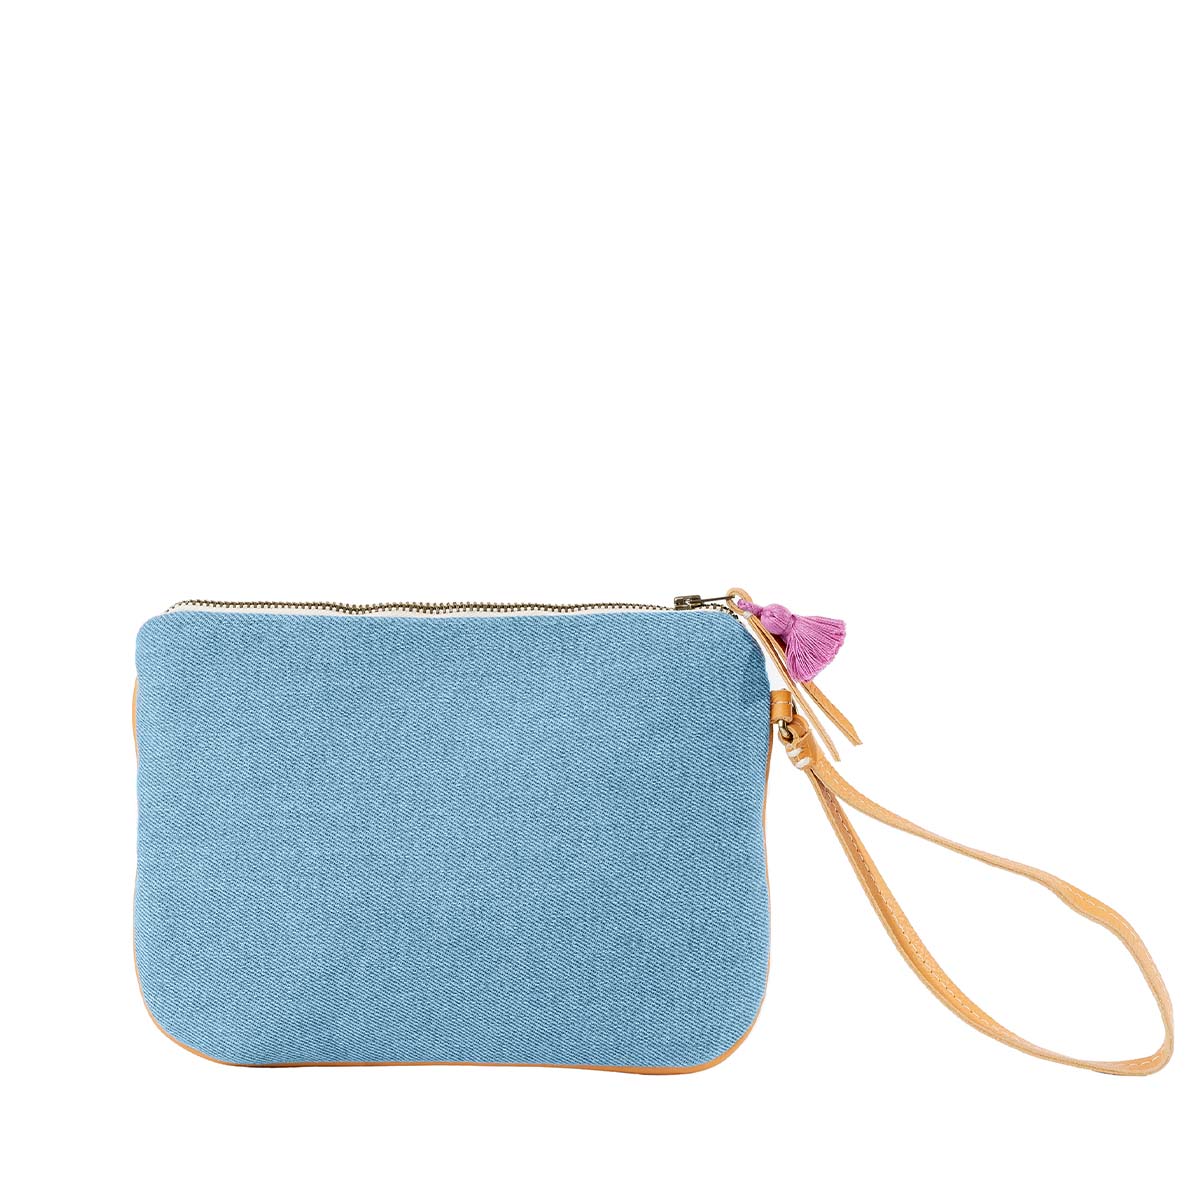 The back of the hand woven artisan Mini Lily Wristlet in Cream Soda. The back has a solid sky blue color. It has a leather wrist strap and a mini pink tassel.